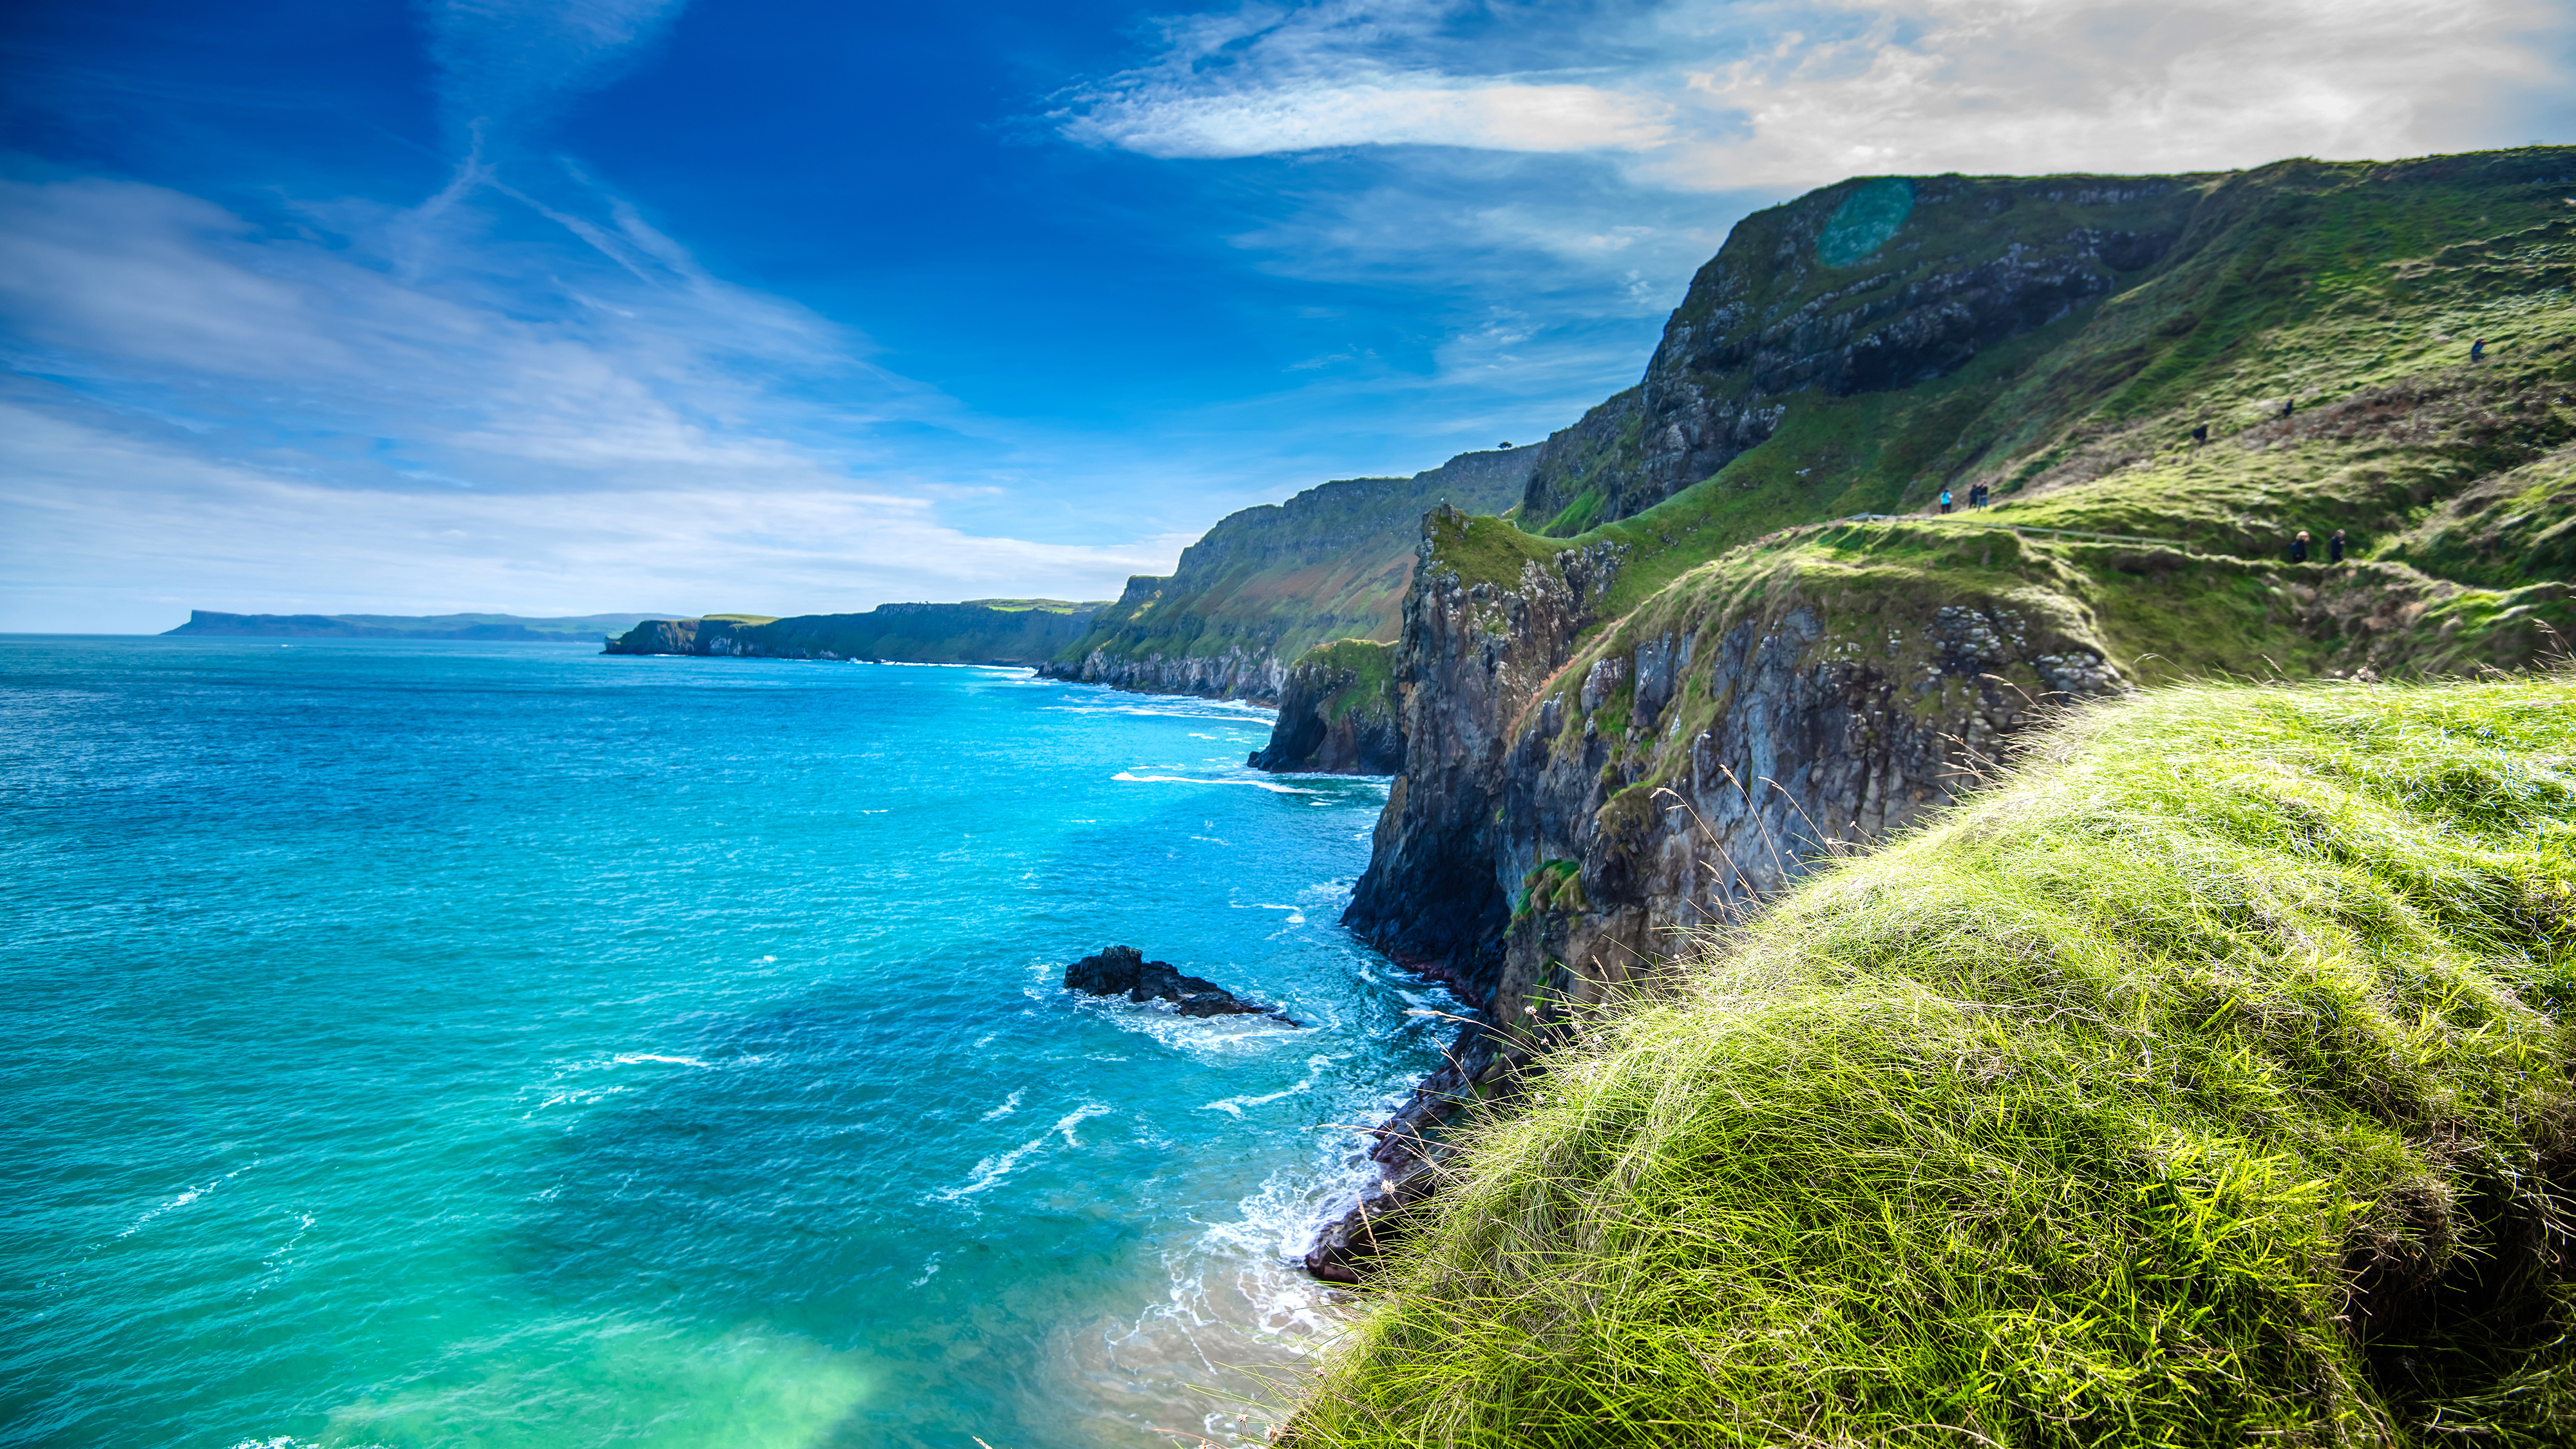 Campsites, camping & things to do in Ireland | The Caravan Club